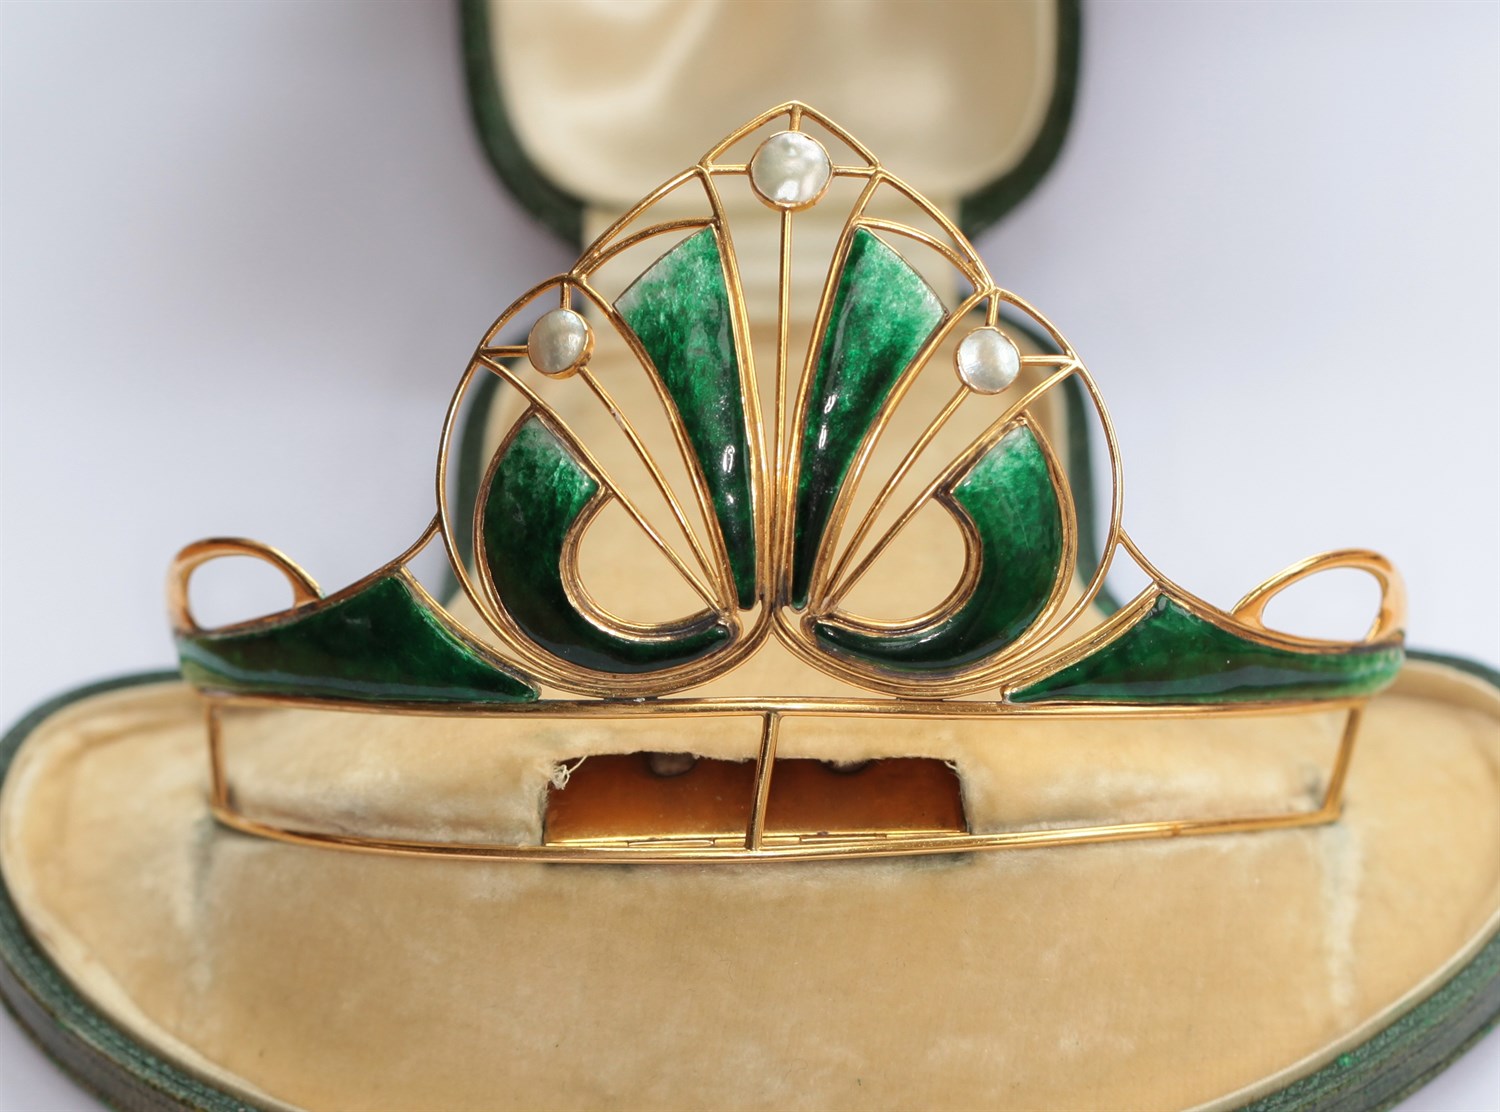 Lot 35 - An early 20th century Scottish green enamel and blister pearl set tiara